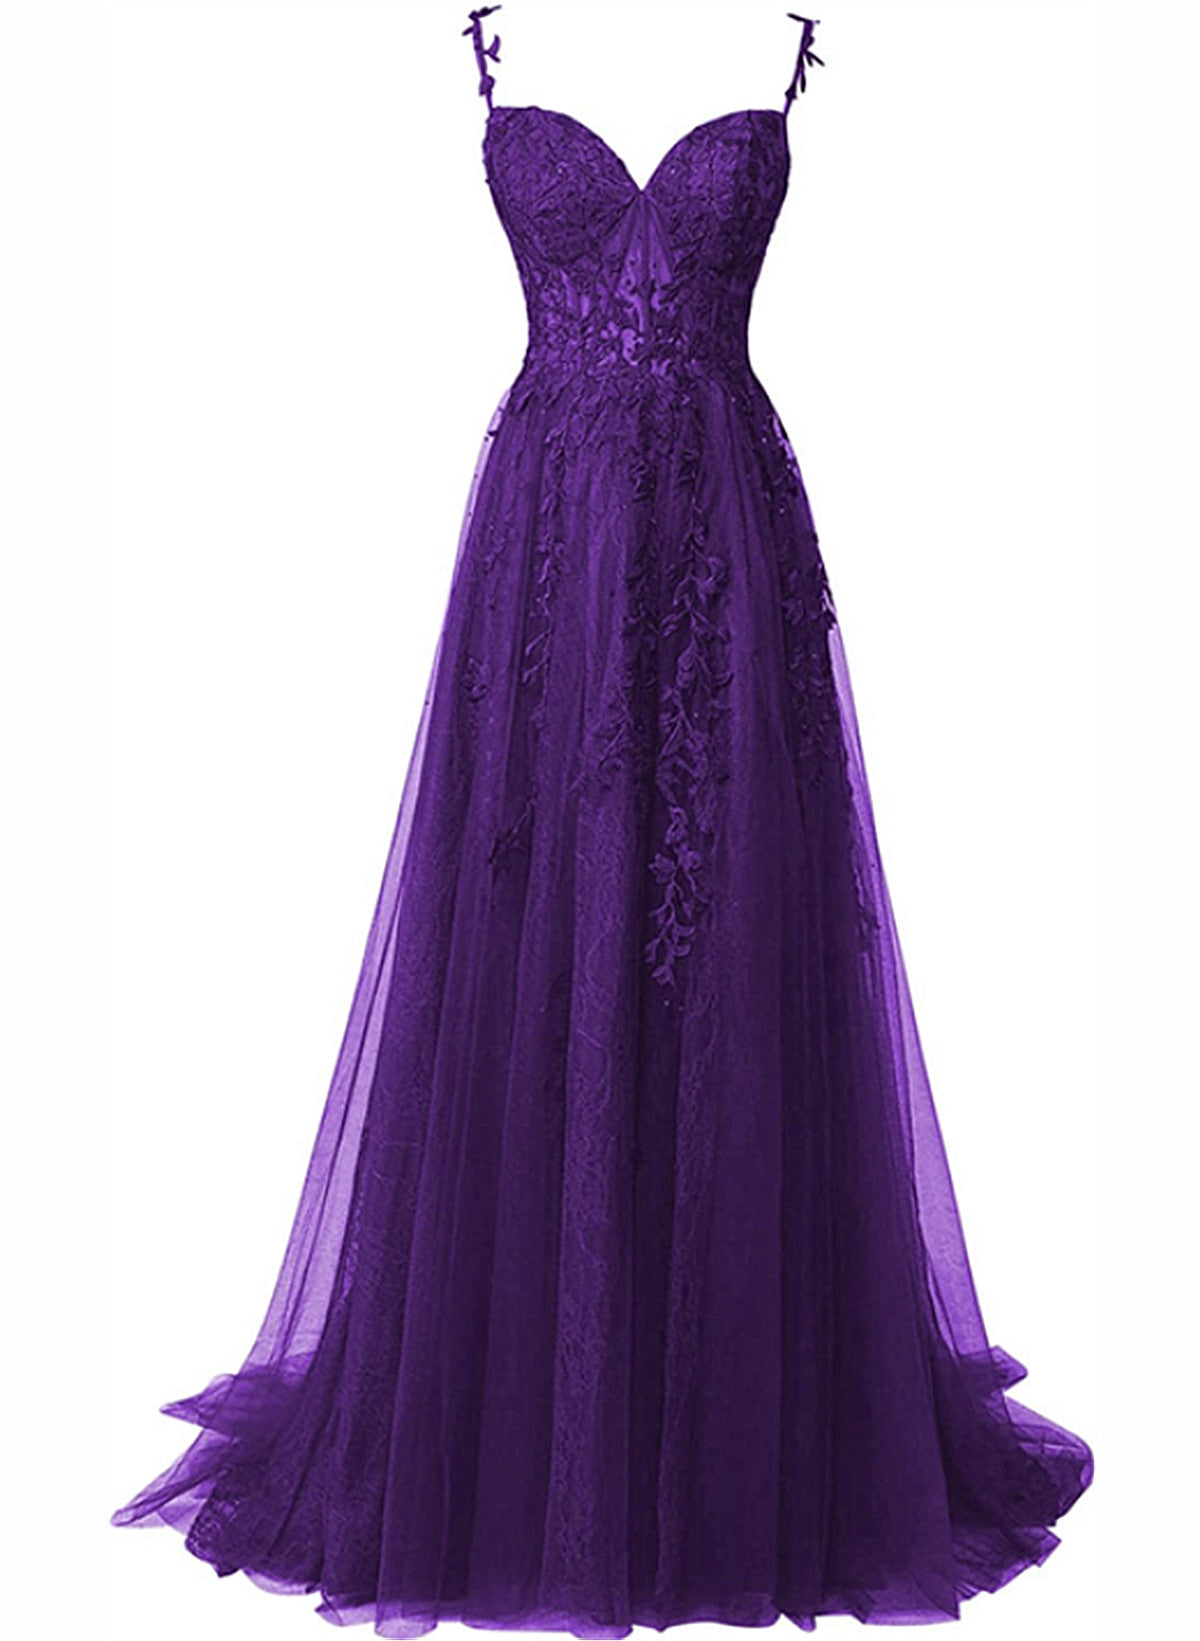 Formal Dress Elegant Classy, Purple A-Line Tulle Off Shoulder Long Prom Dress With Lace, Purple Evening Dress Party Dress